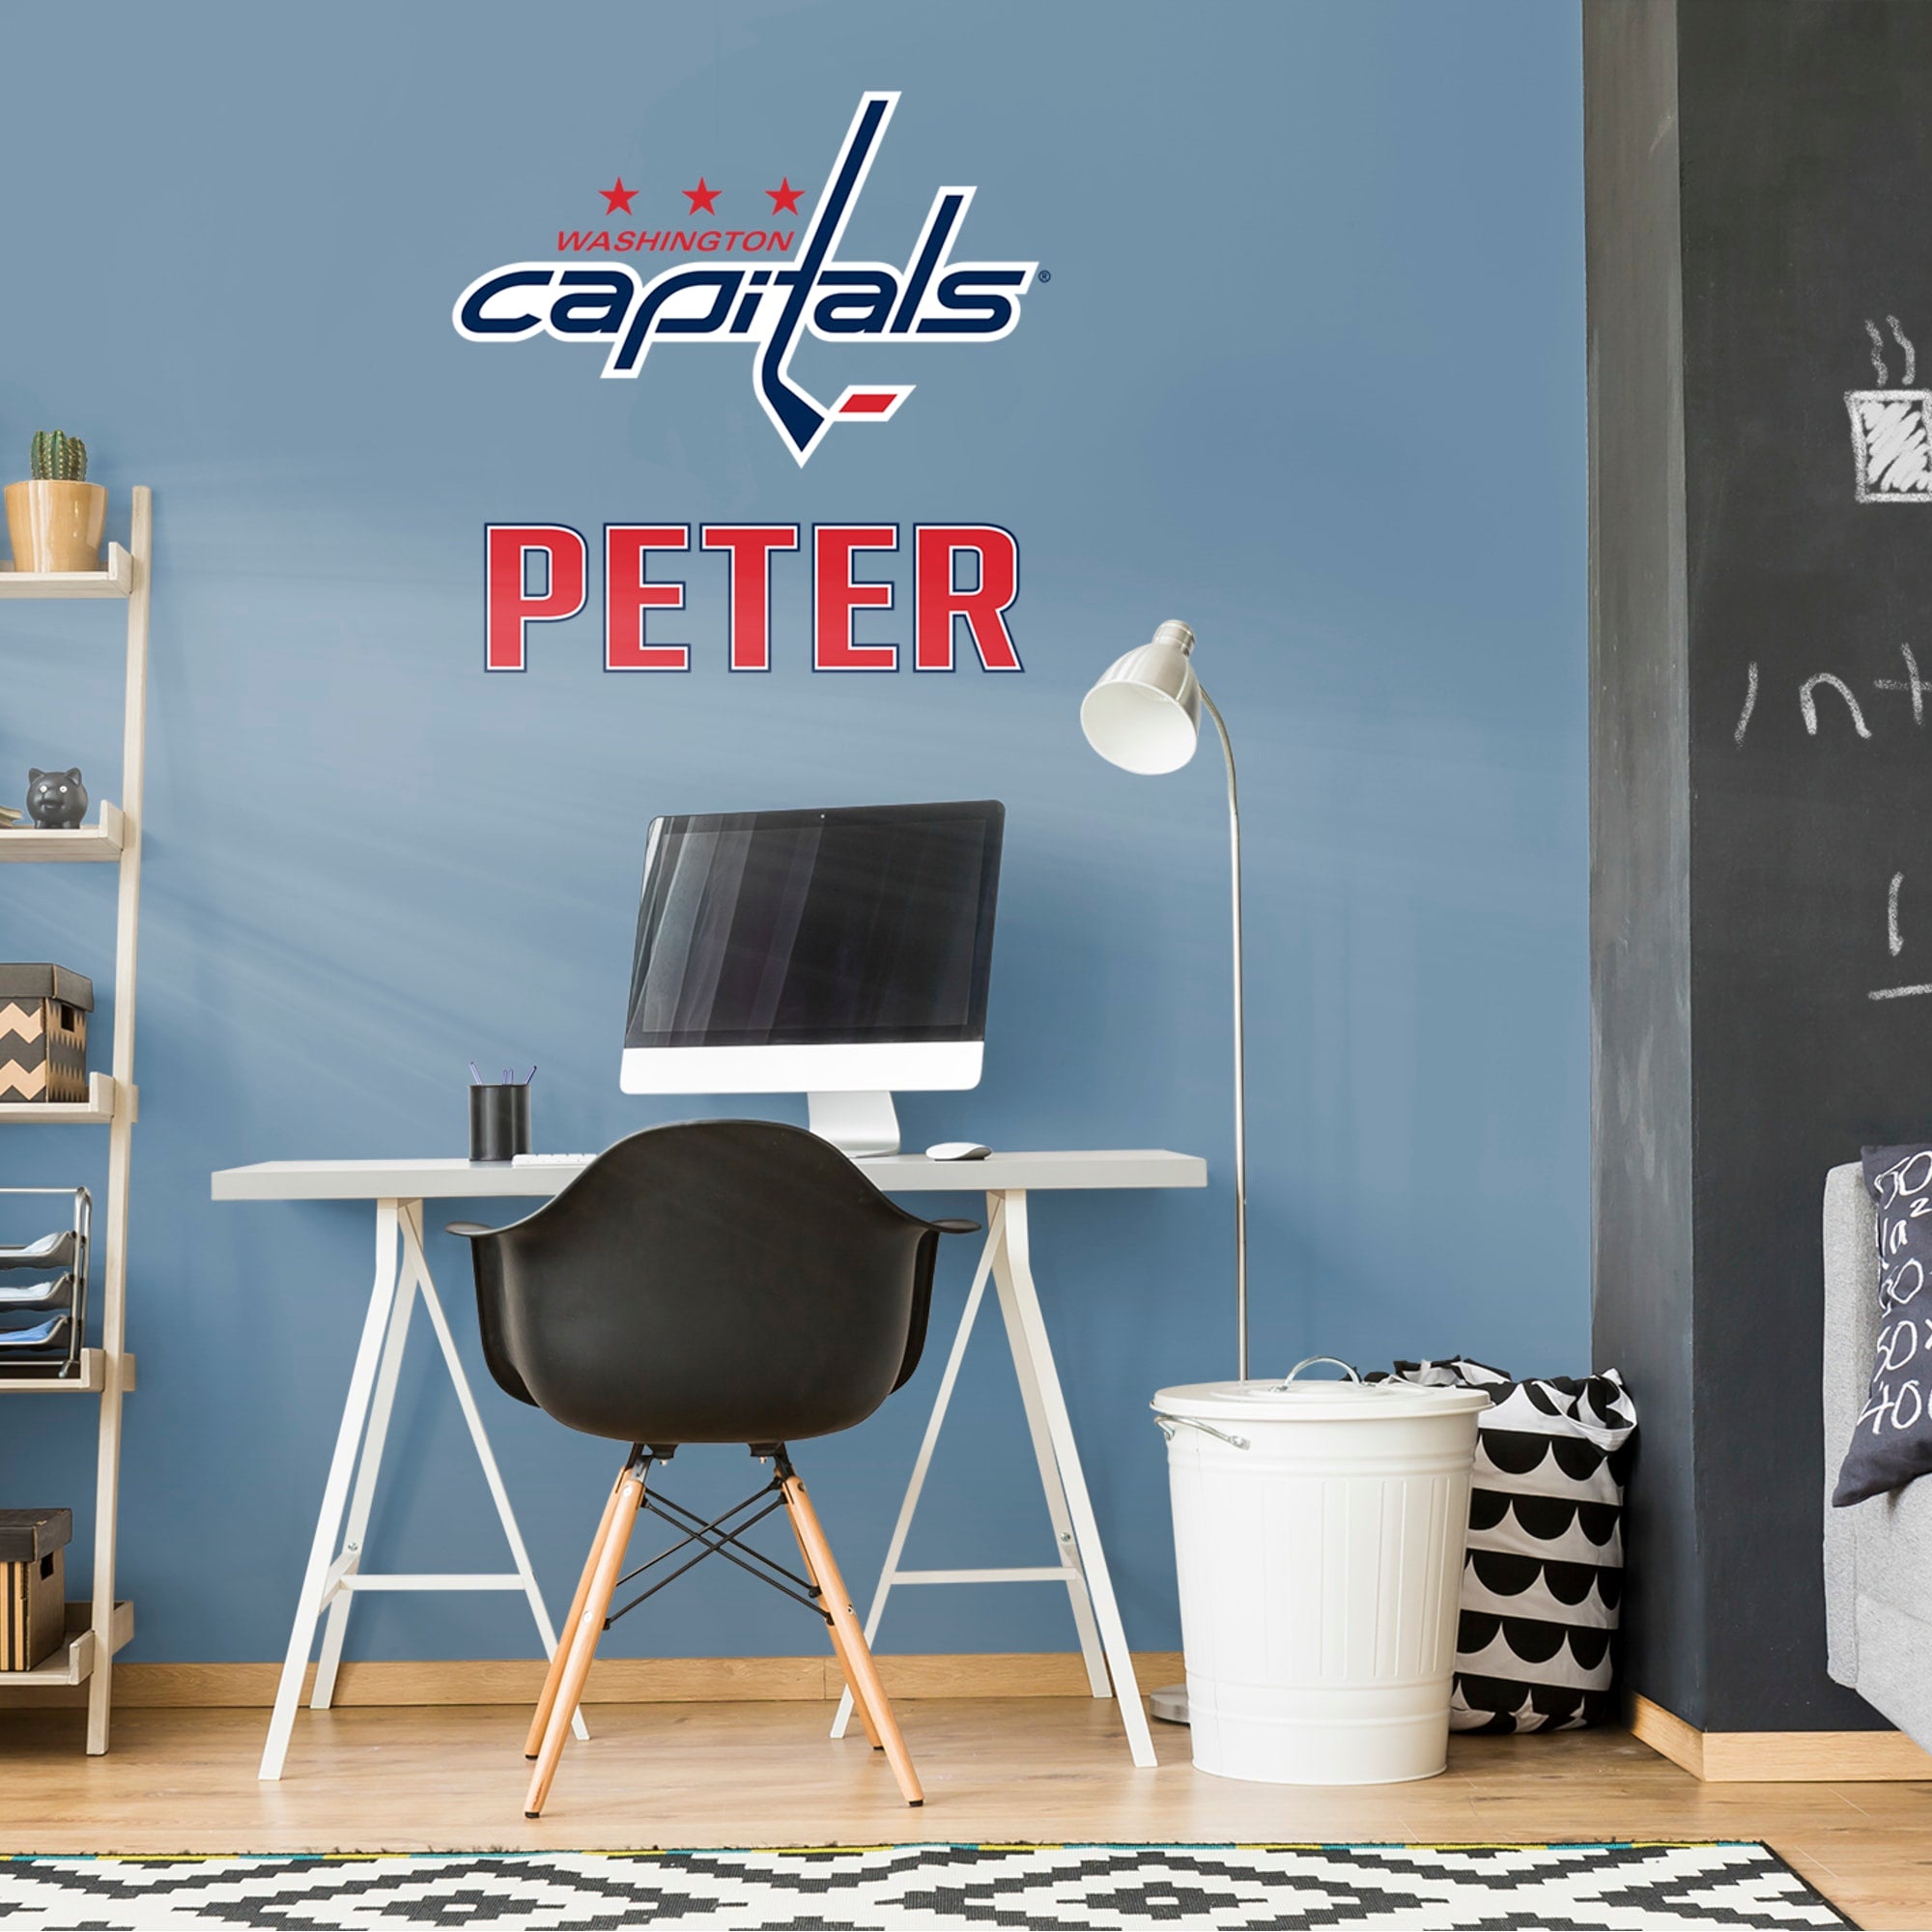 Washington Capitals: Stacked Personalized Name - Officially Licensed NHL Transfer Decal in Navy/Red (39.5"W x 52"H) by Fathead |